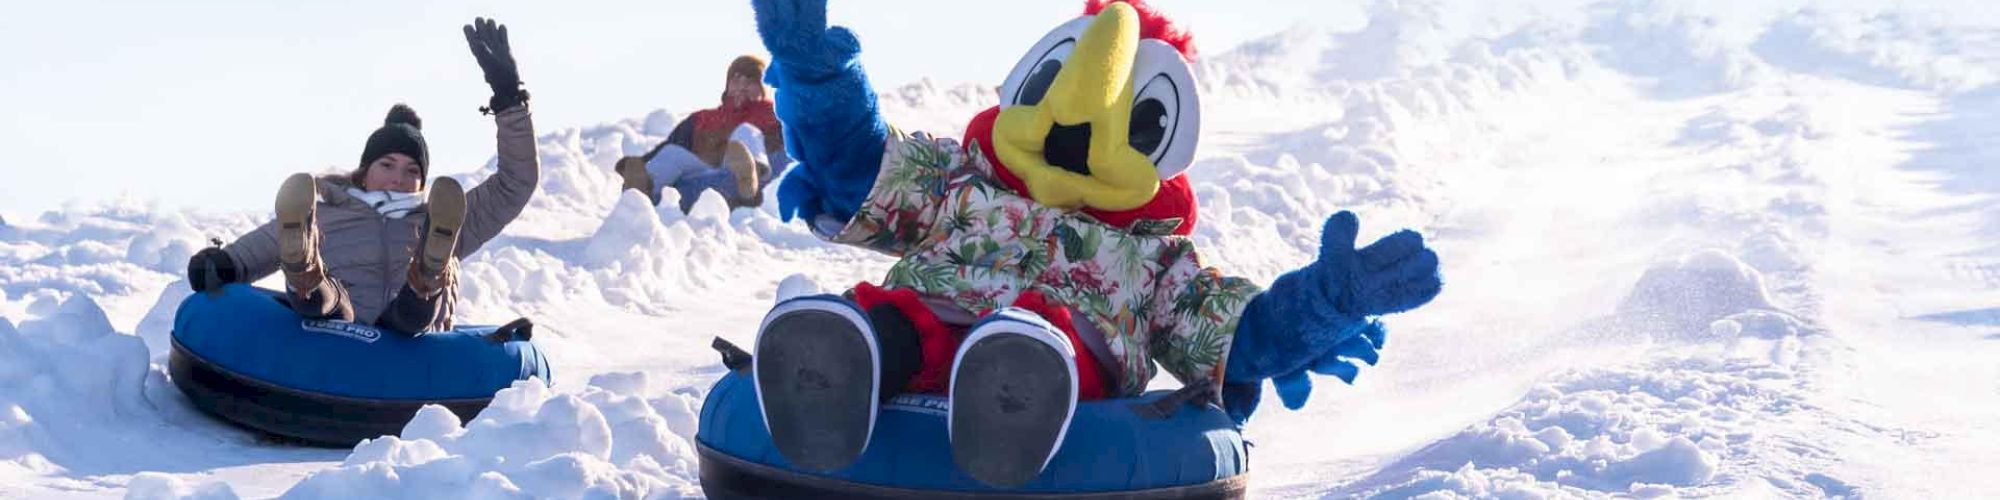 Three individuals, including one in a bird mascot costume, are tubing down a snow-covered hill, raising their arms in enjoyment in the image.